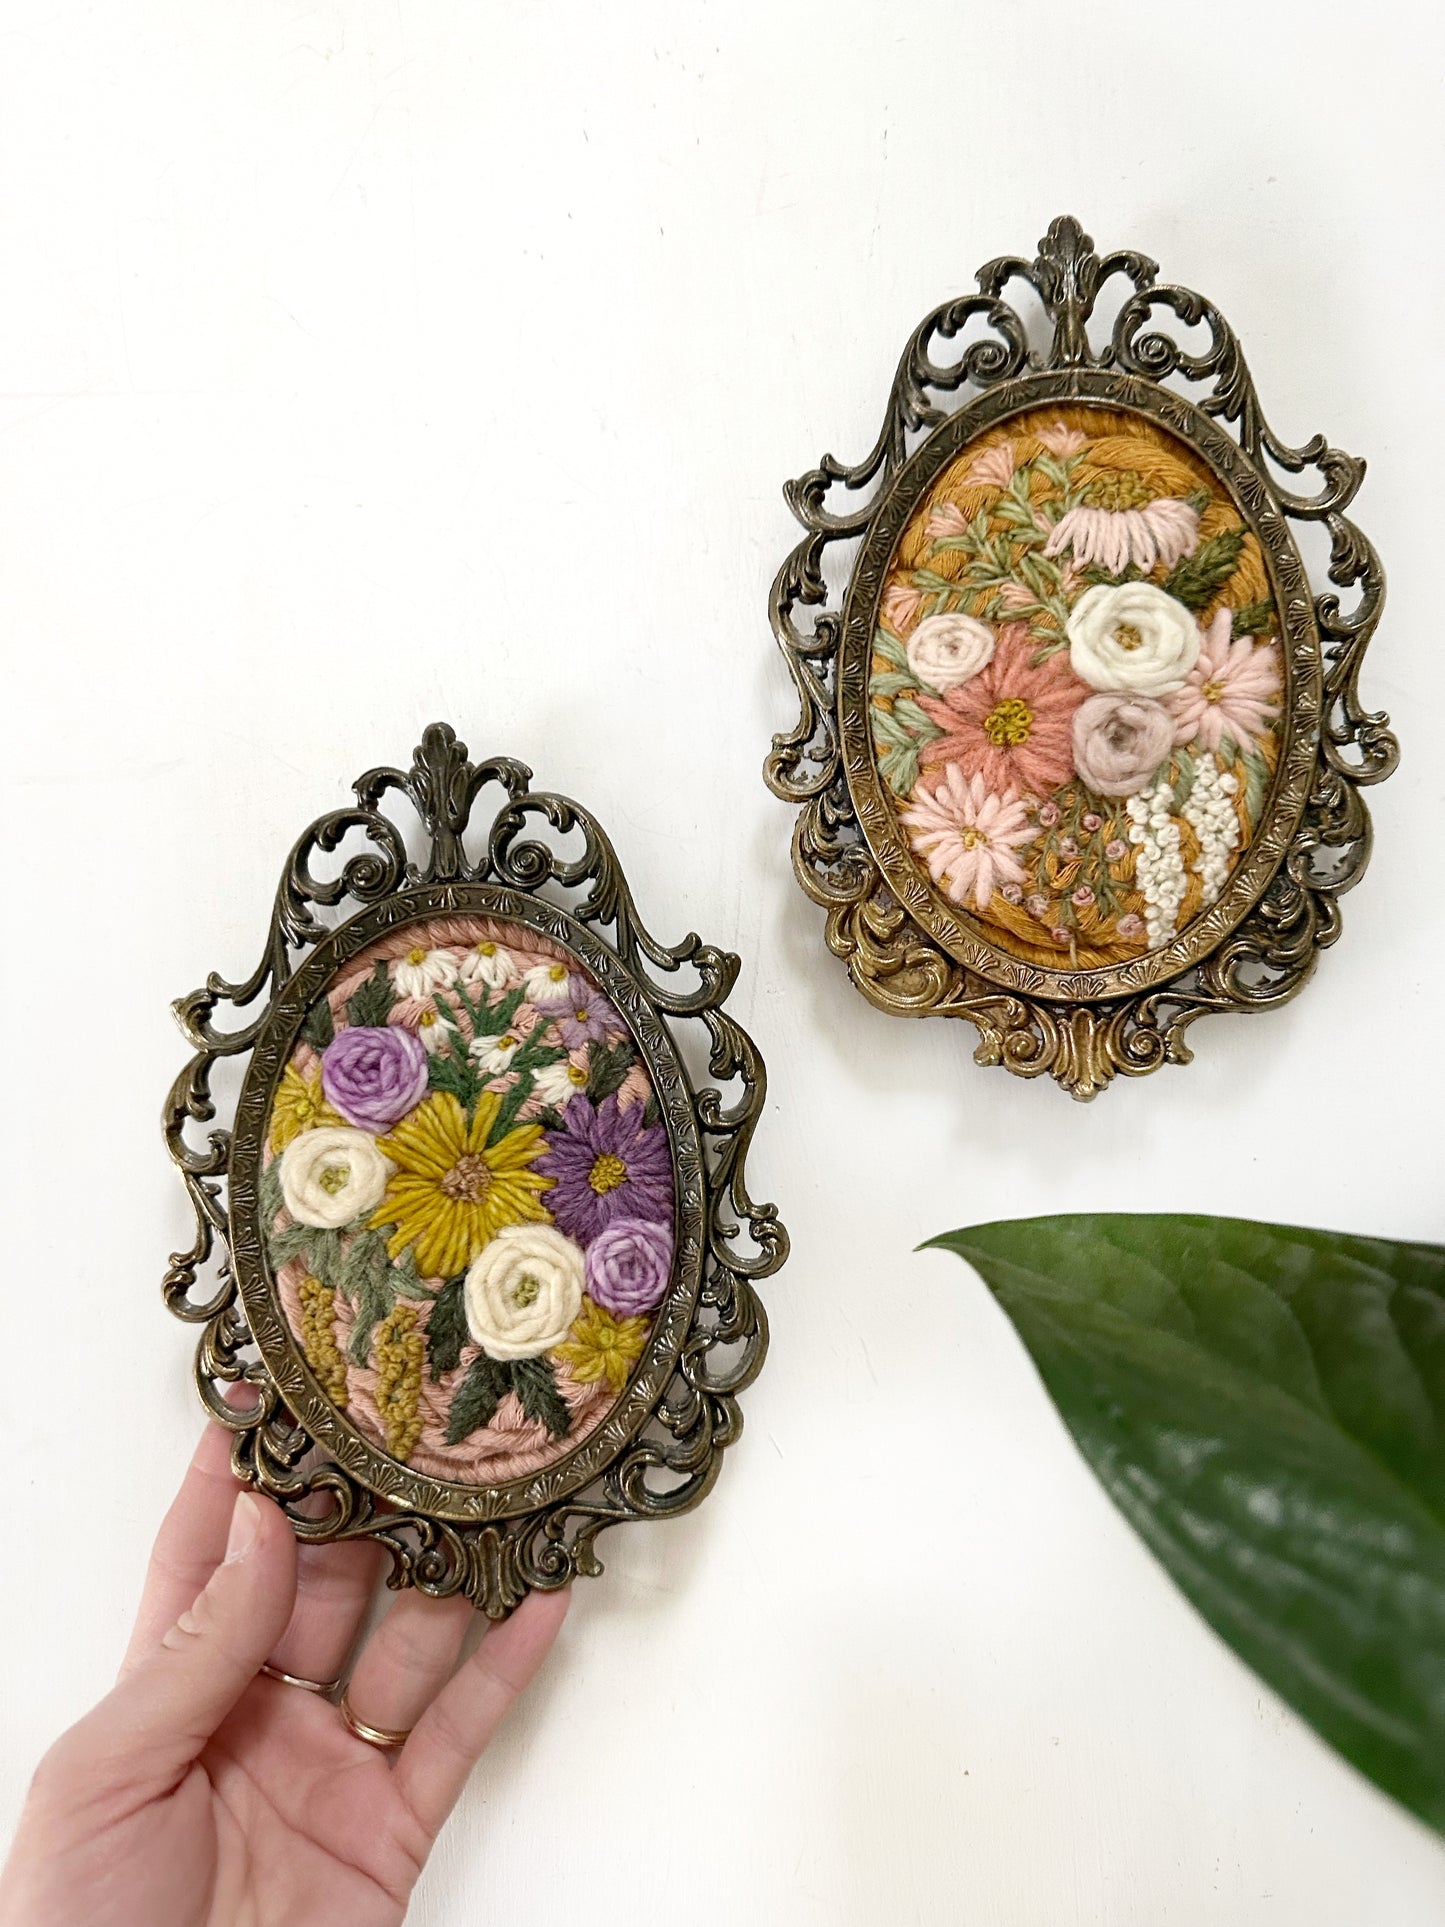 Small Embroidered Weavings in Vintage Frames